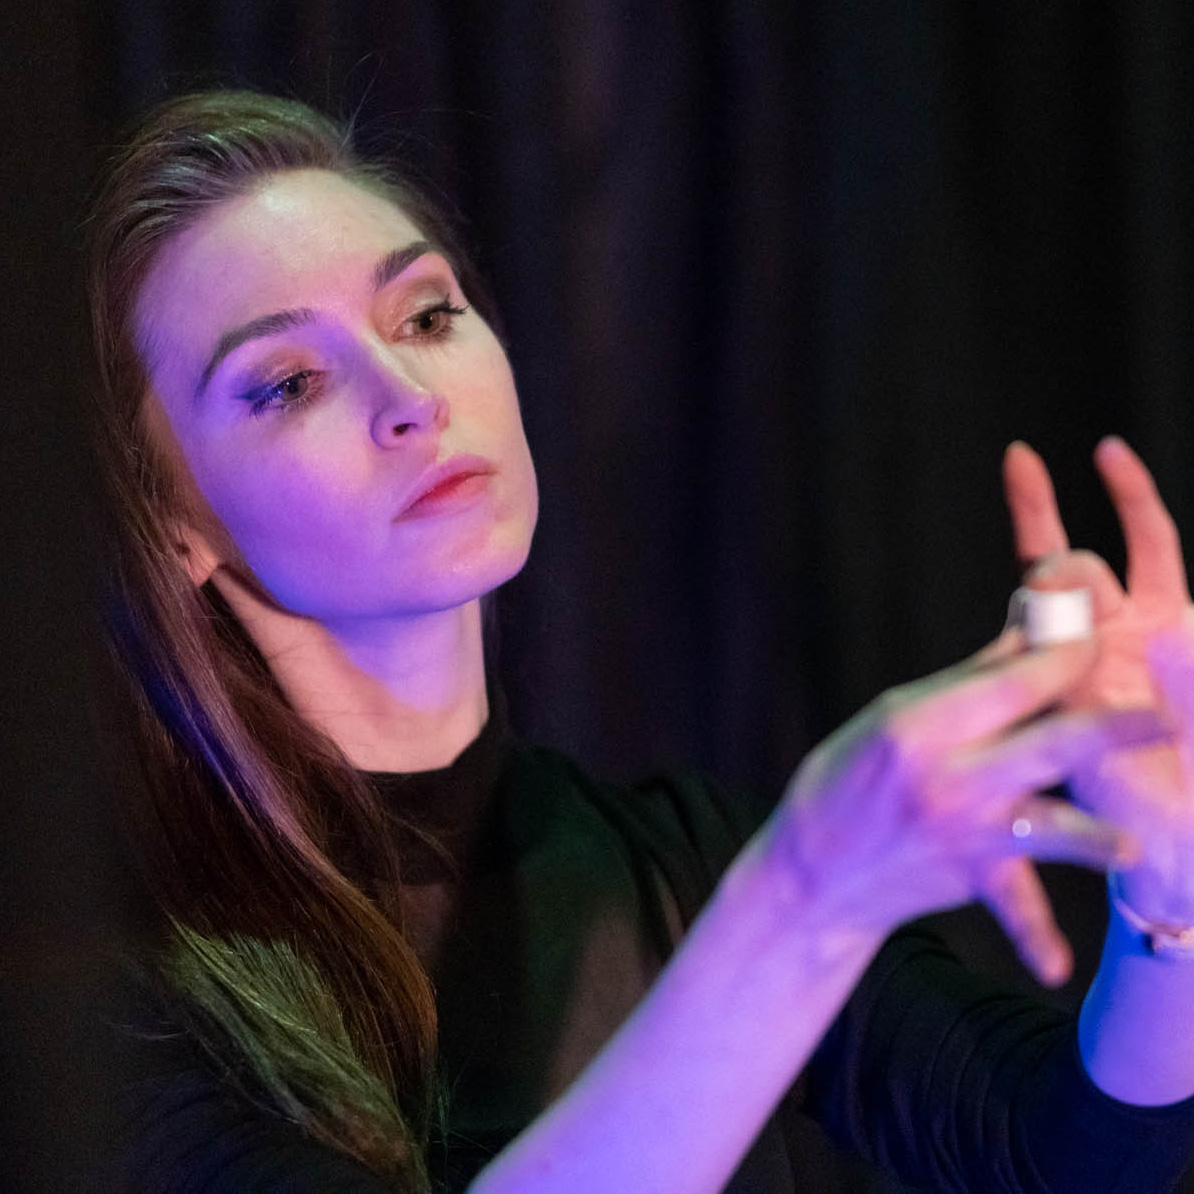 Illusionist and Artist Jeanette Andrews is light with a cool magenta light and performs a magic trick, holding a spool of white thread dramtically between her fingers 